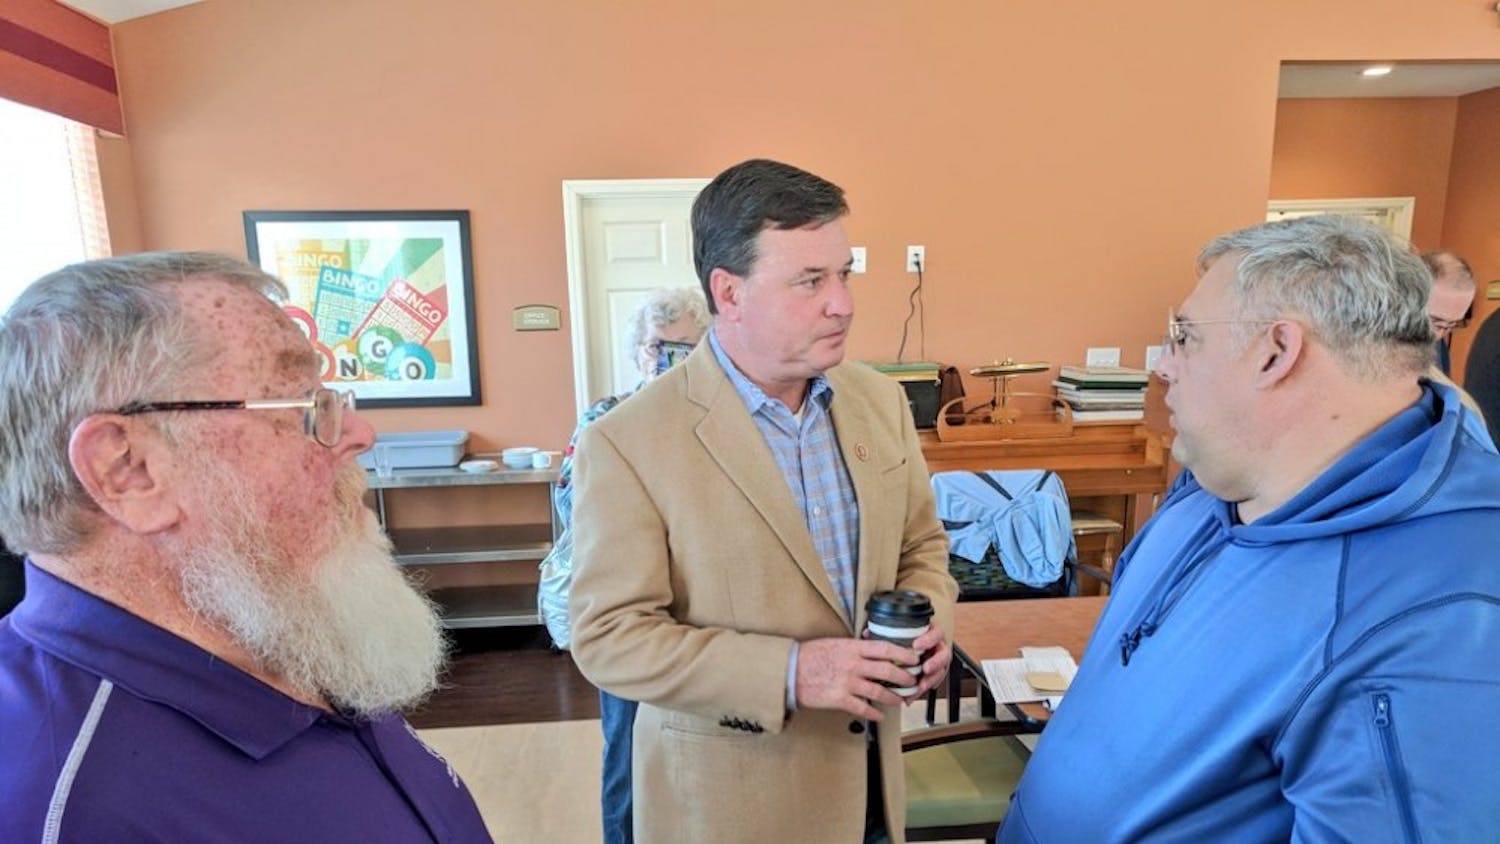 Rep. Todd Rokita, R-4th District, speaks at a meet-and-greet Saturday at Gentry Park Bloomington Senior Living Community. The former Indiana secretary of state is one of the multiple Republicans running to eventually unseat Sen. Joe Donnelly, D-Indiana.